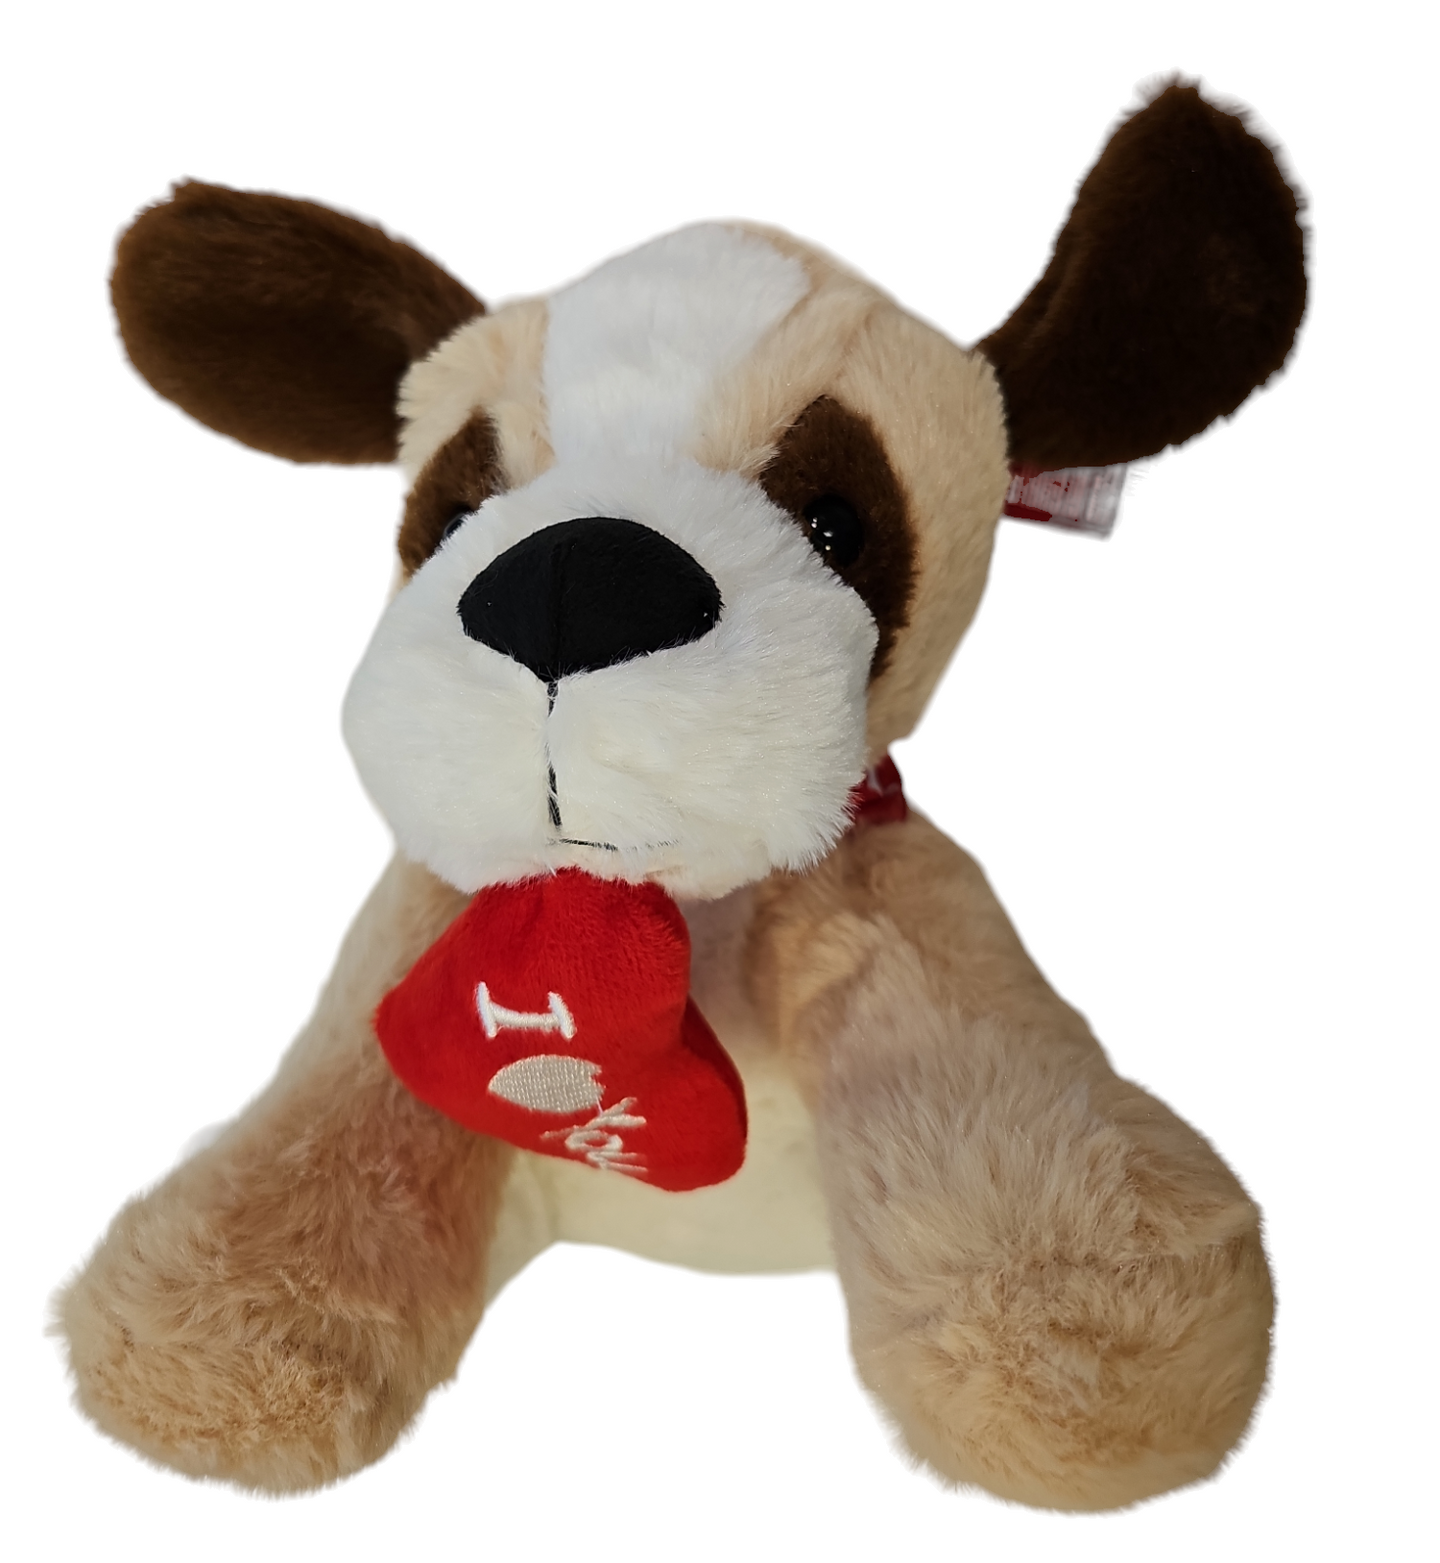 I Love You Puppy Plush Soft Toy (Brown) 27cm